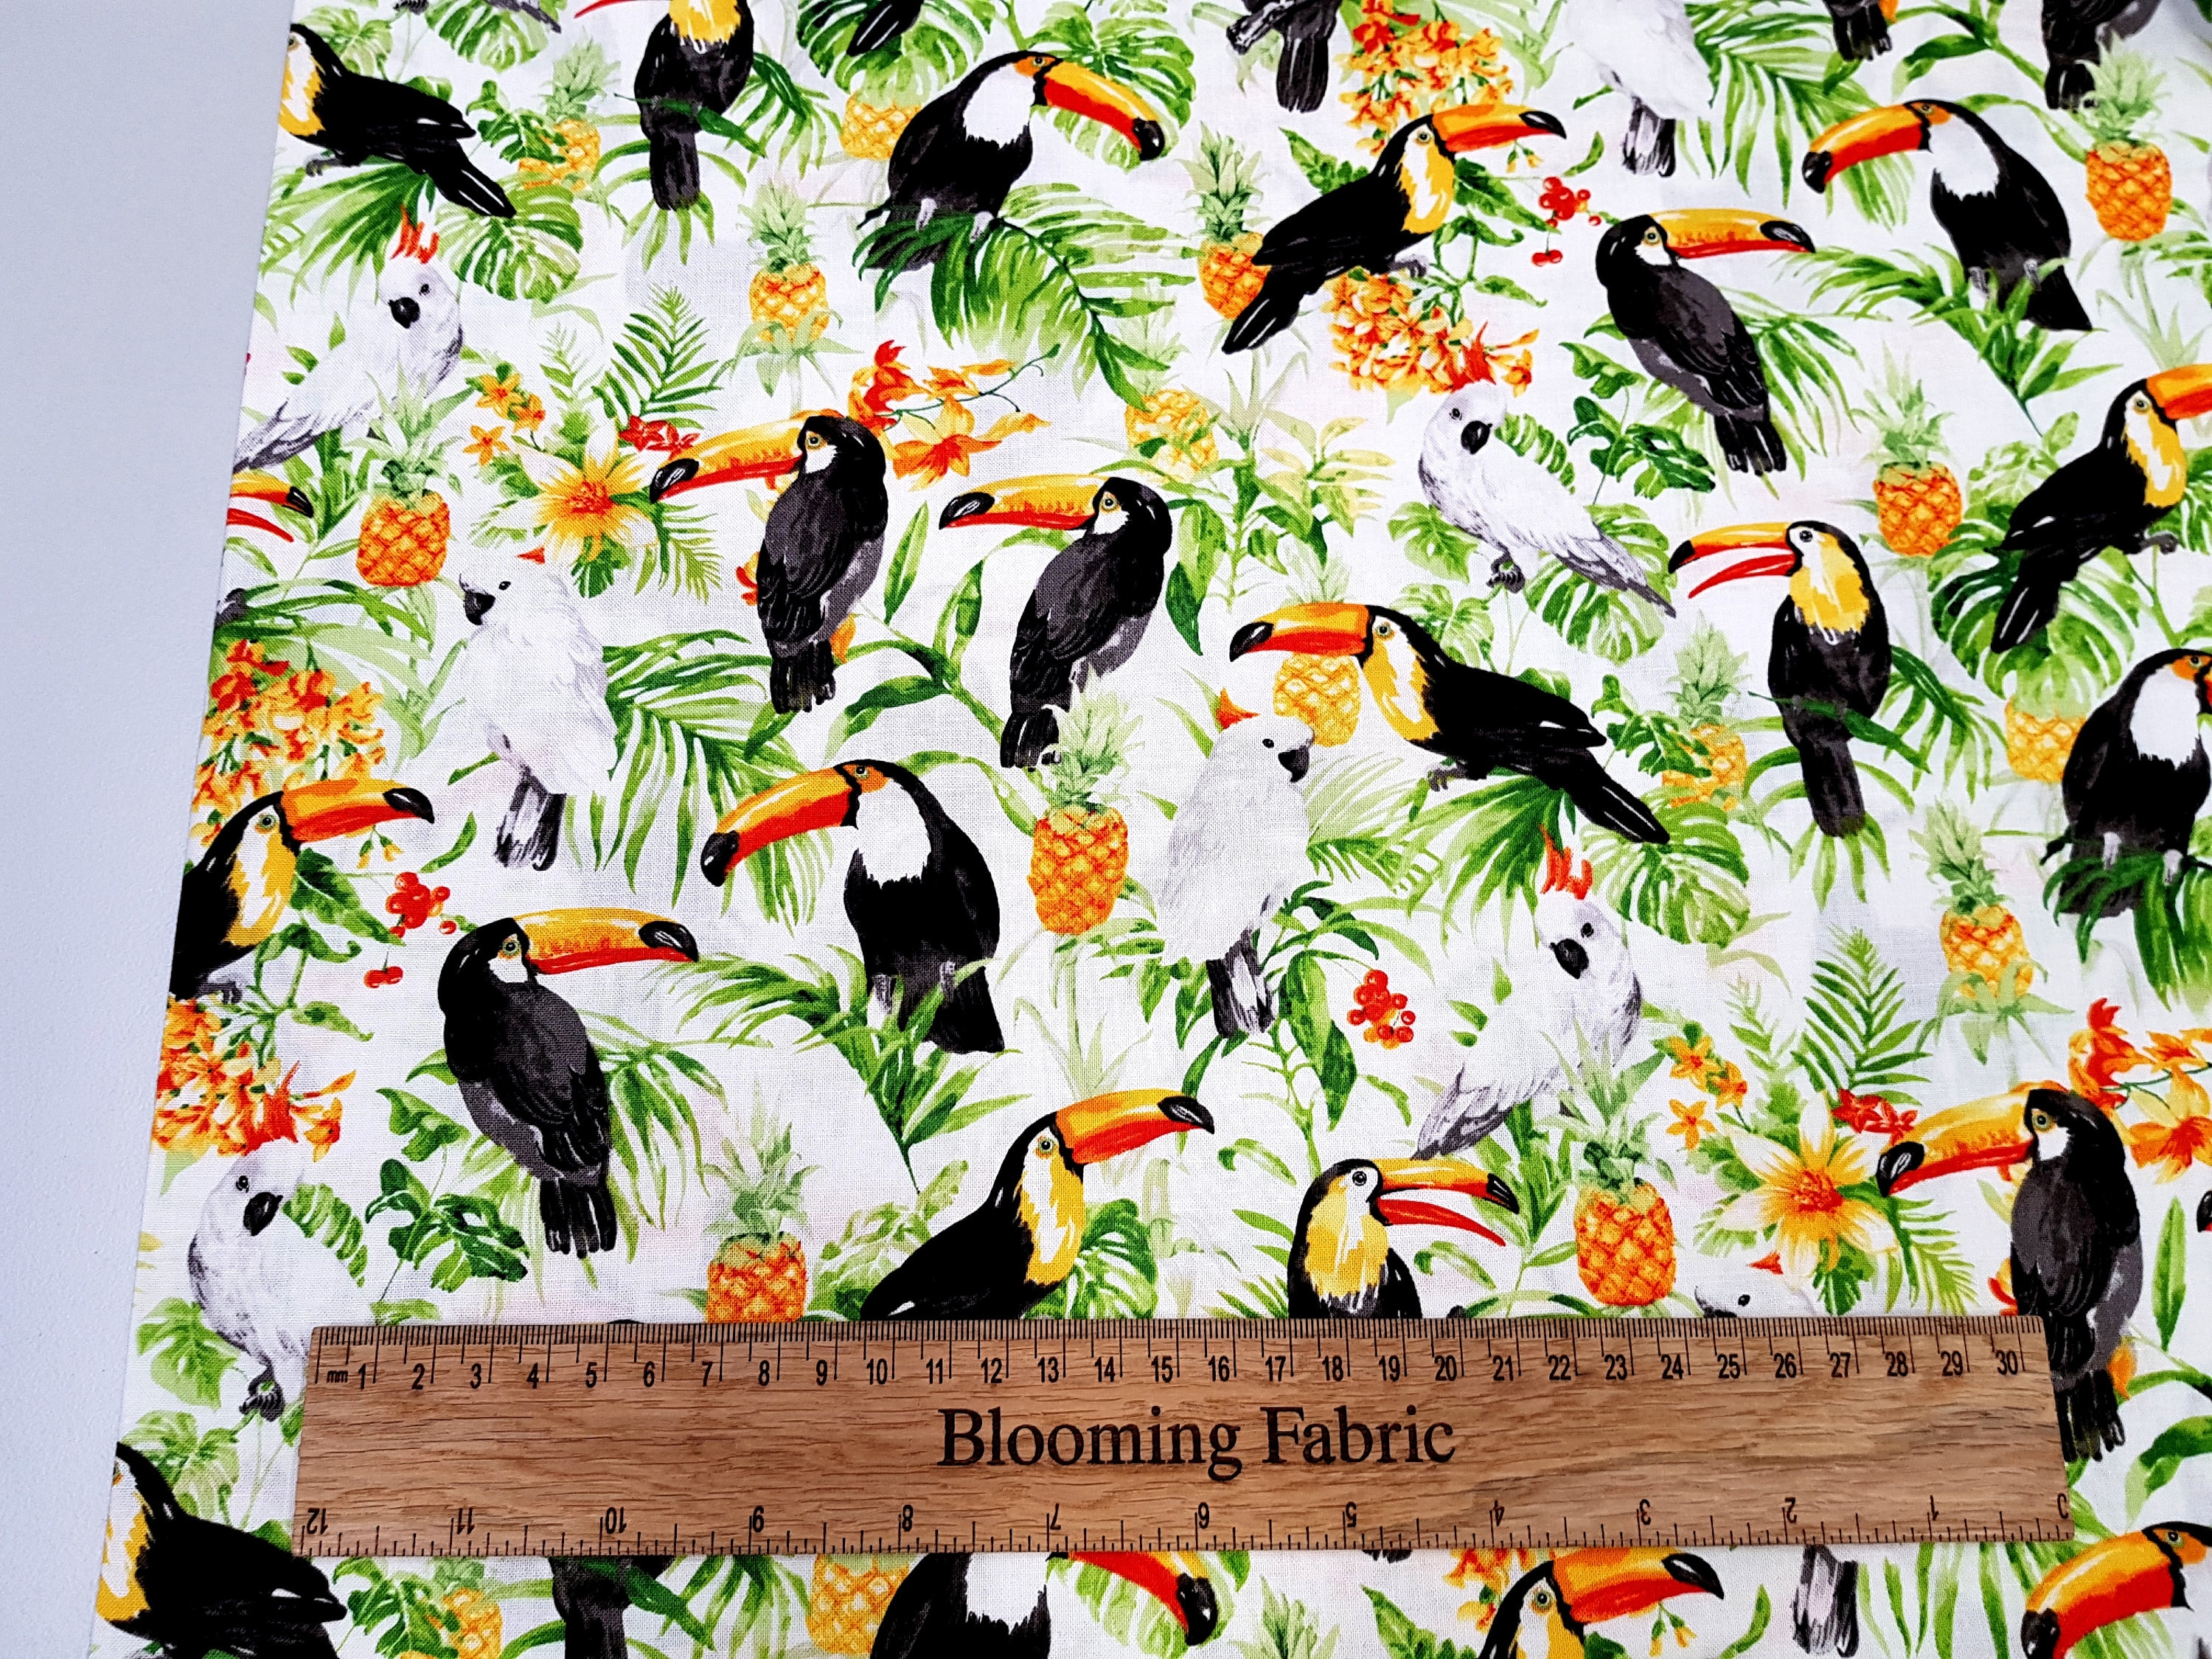 Hawaiian fabric Tropical fabric 100% cotton craft and clothing quilting fabric Yard Meter 43 wide toucans fabric